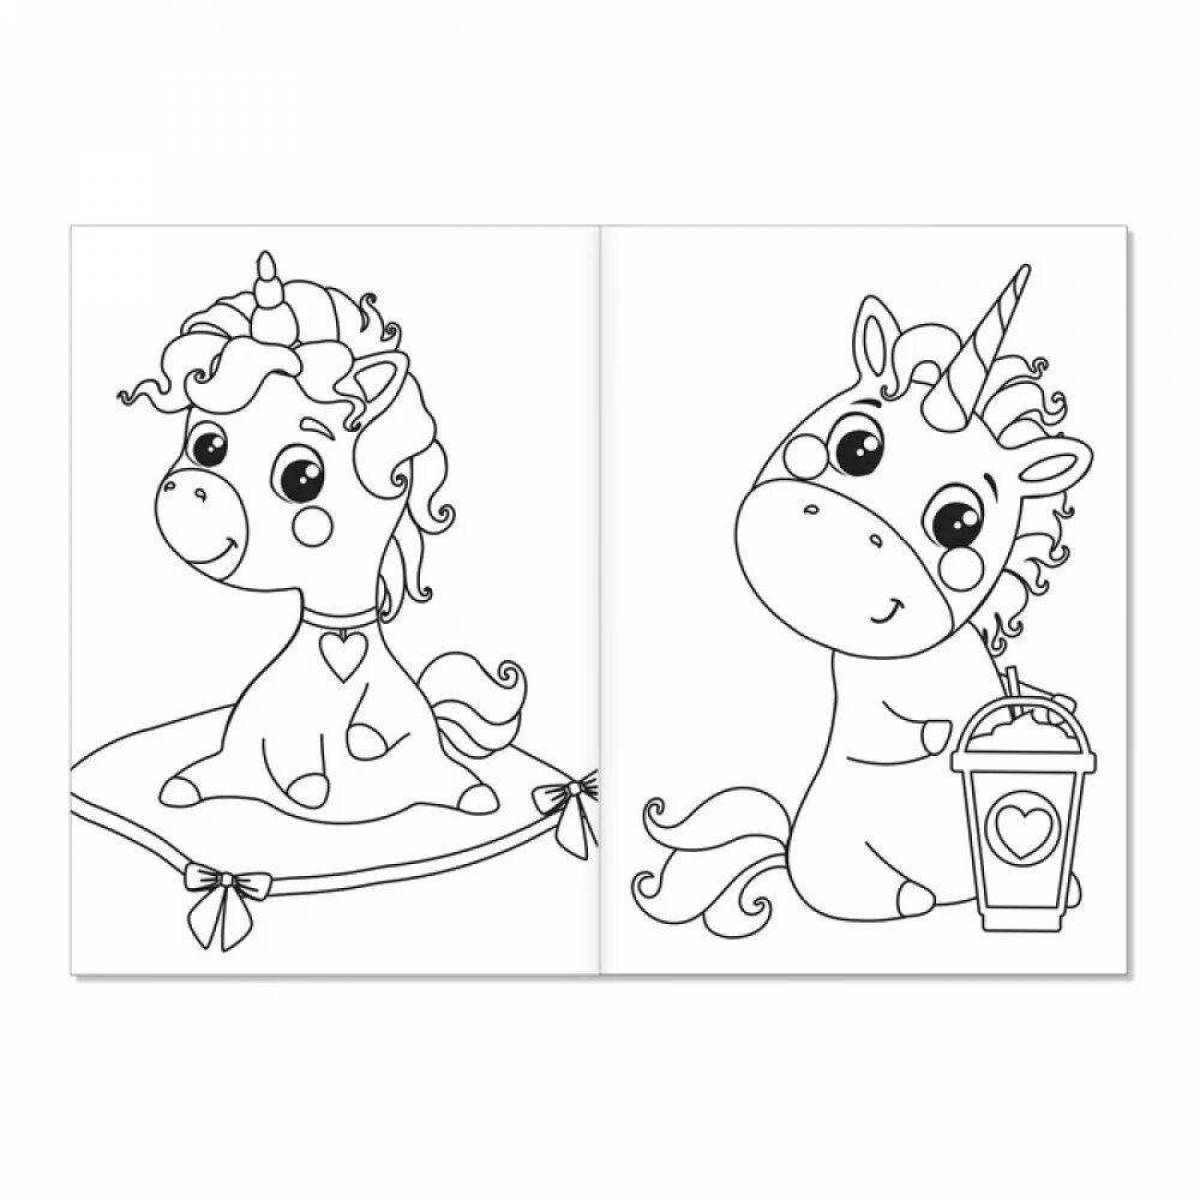 Two-on-one coloring book for children